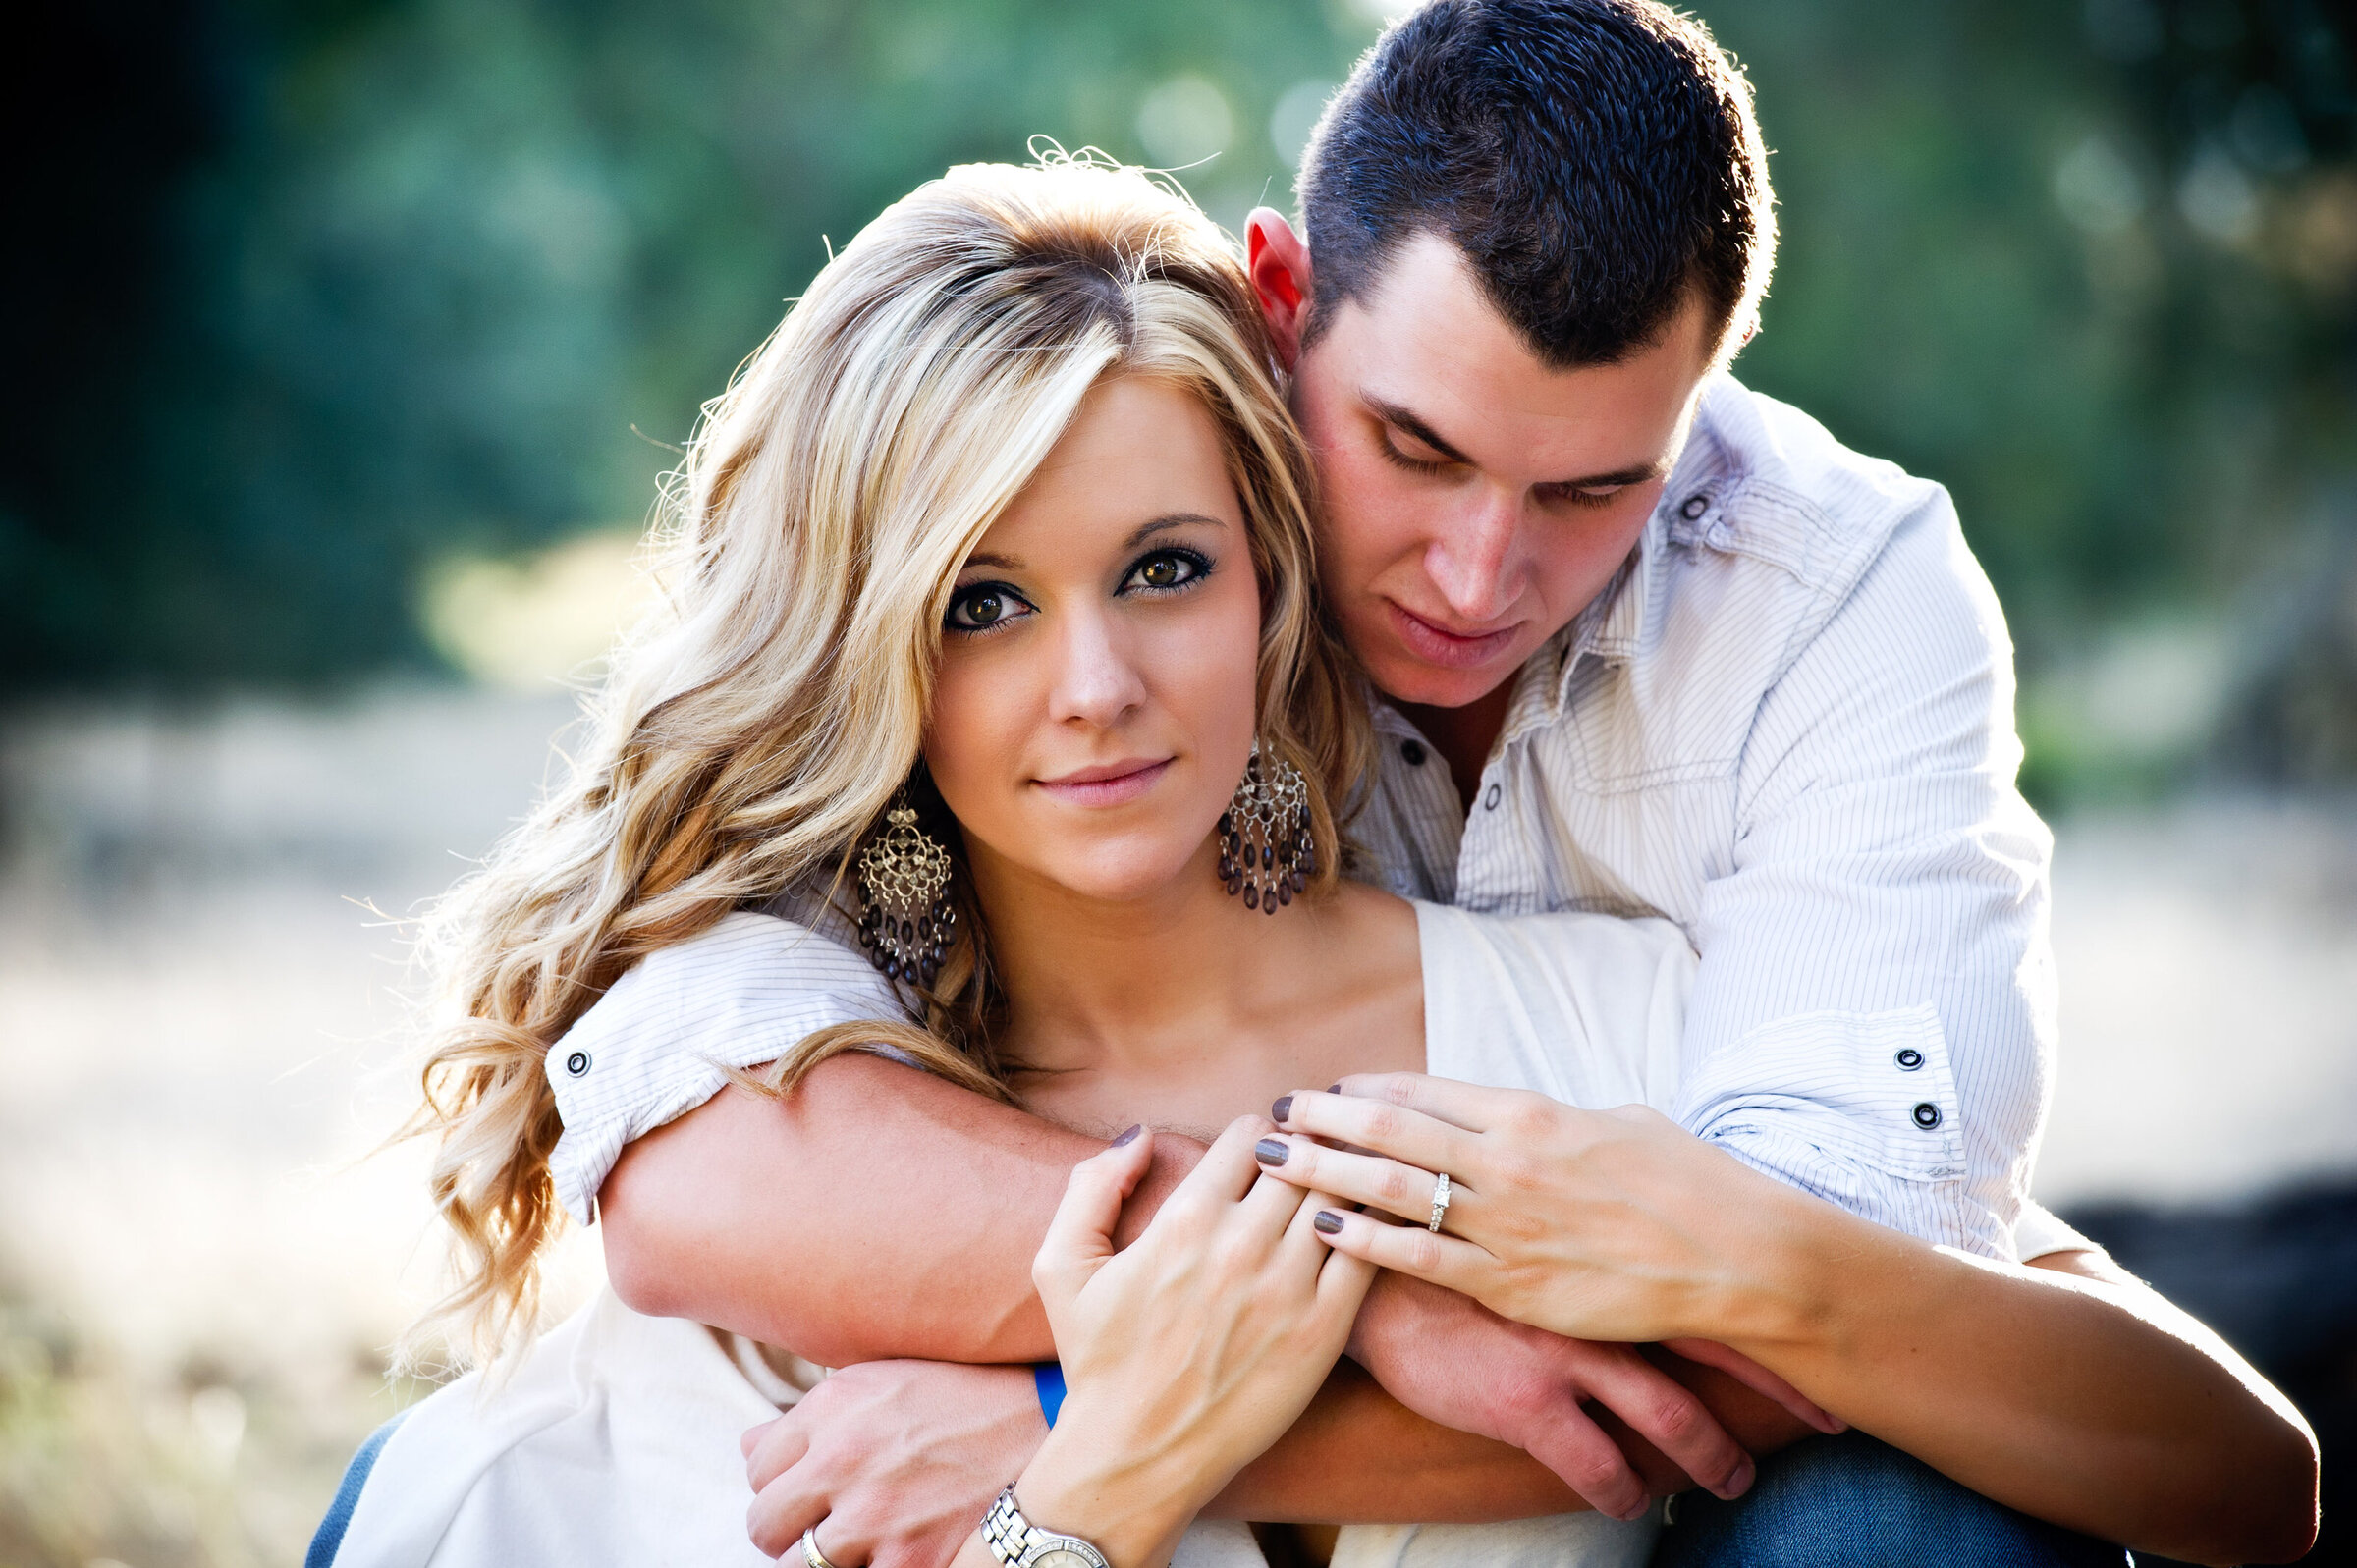 engagement-hugging-young-couple-intimate-